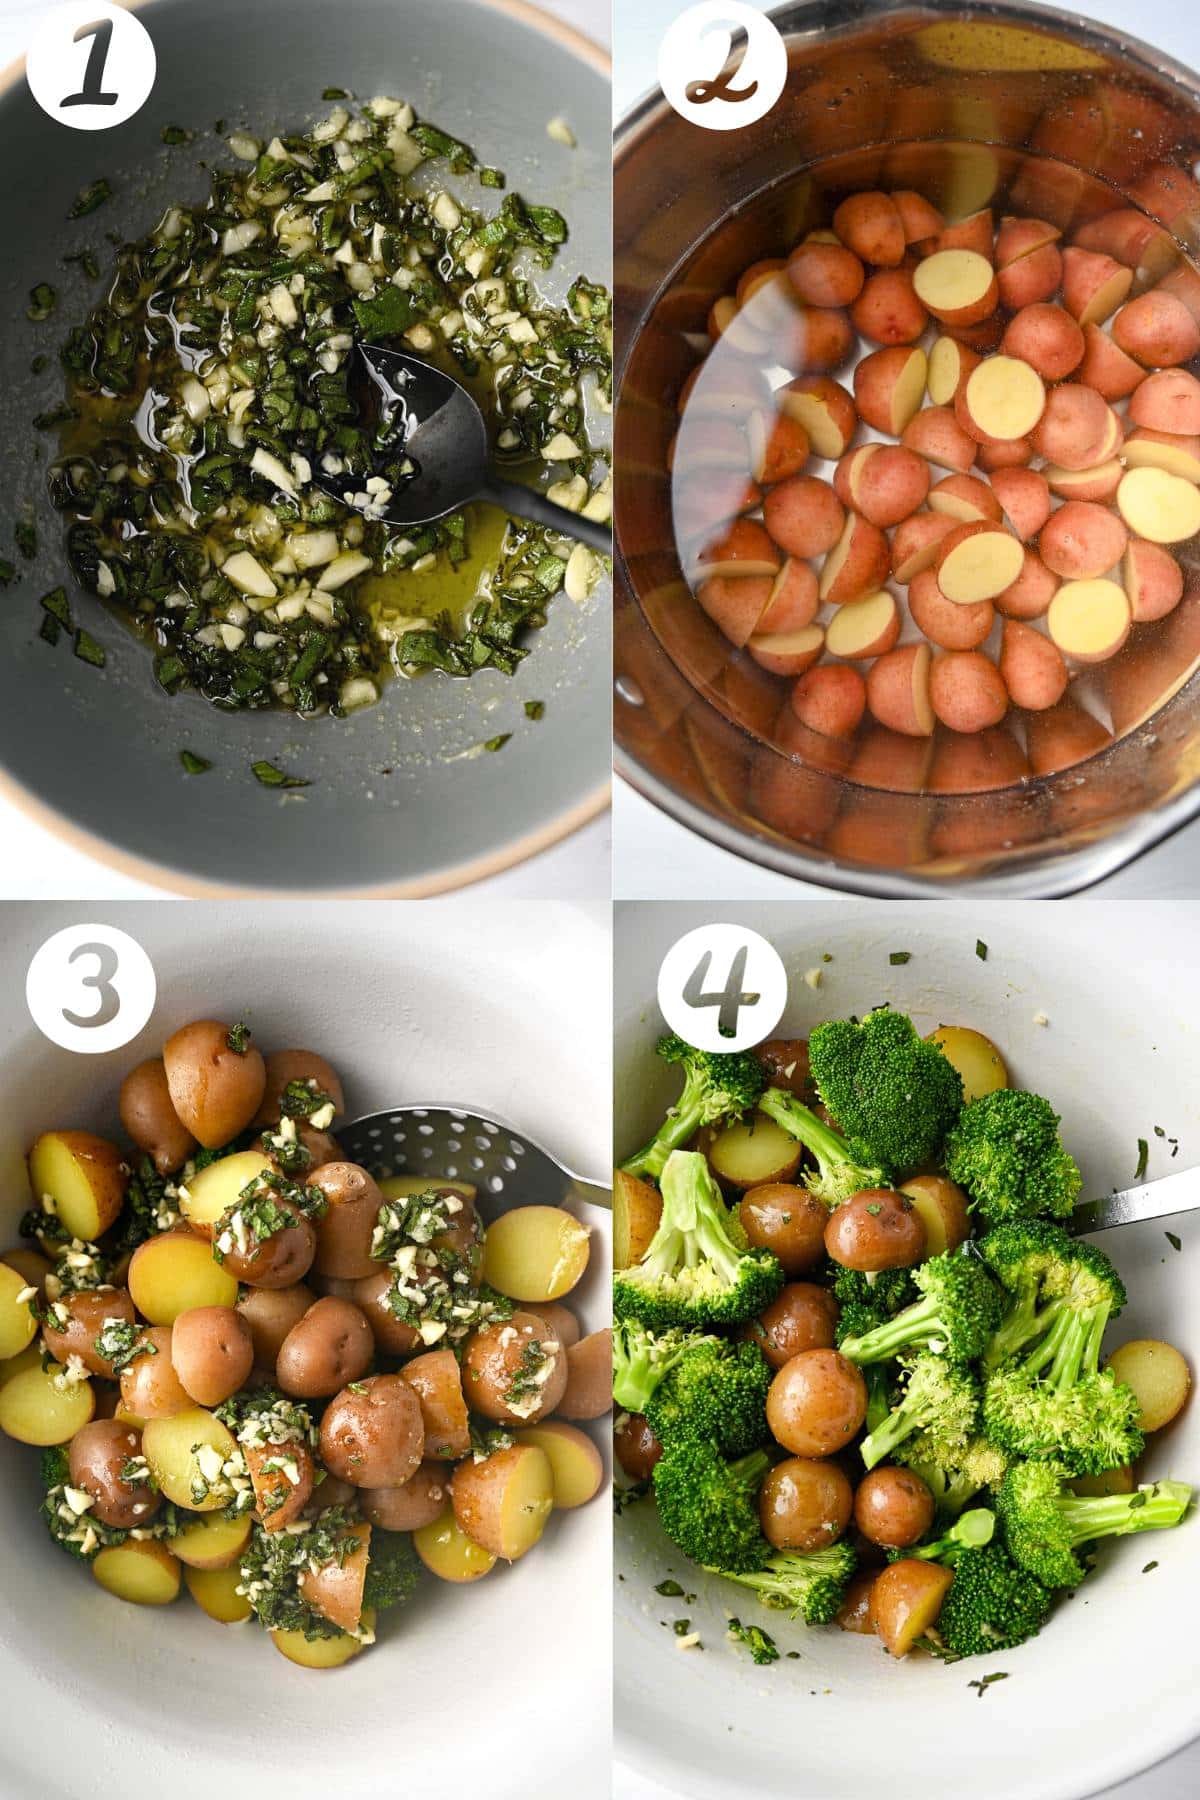 four step photos for making roasted potatoes and broccoli: mixing dressing, boiling potatoes, tossing veggies to coat